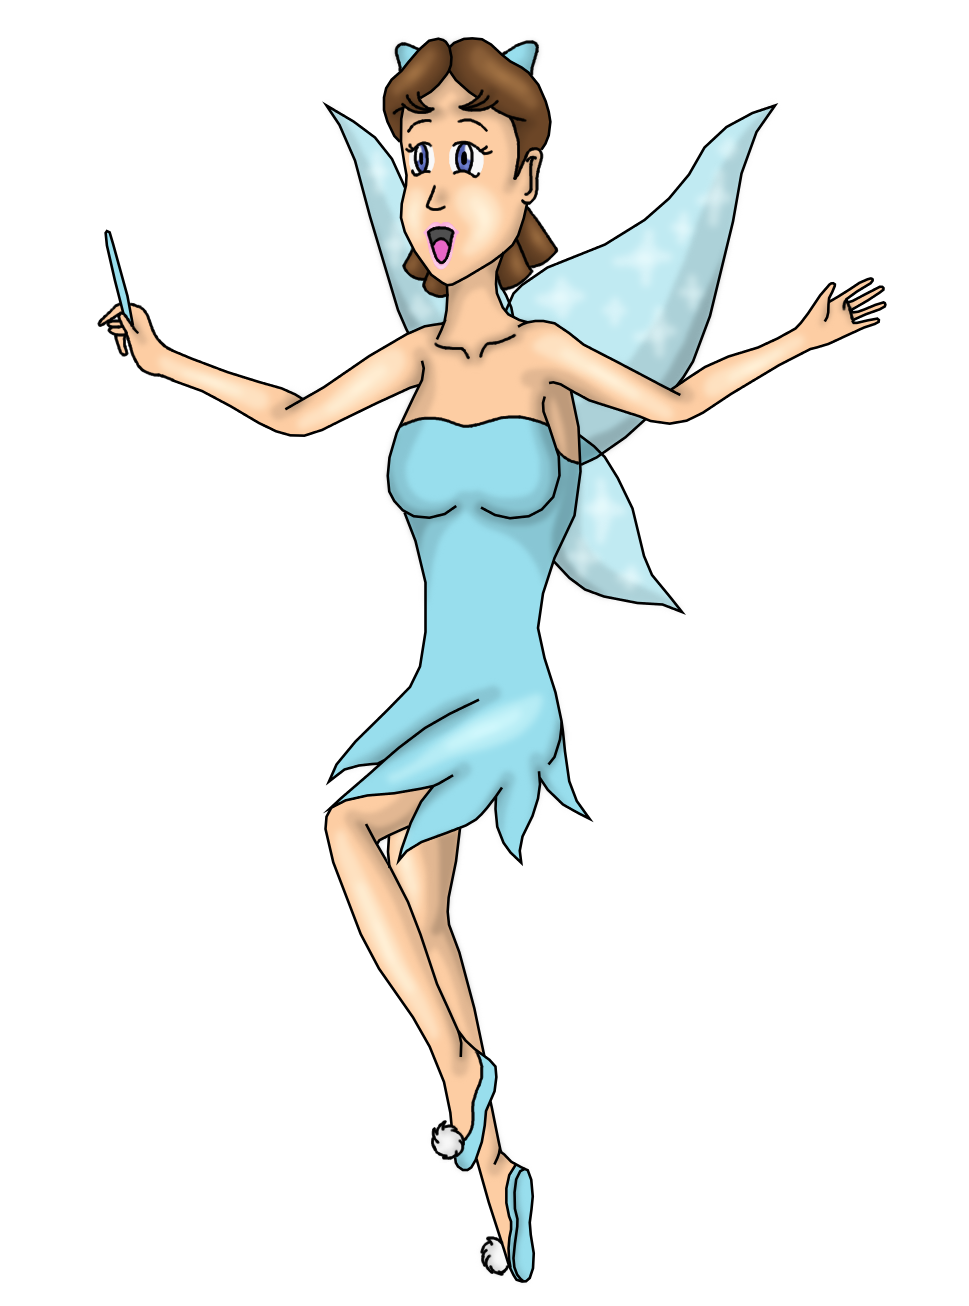 Wendy as Tinkerbell by Cclarke